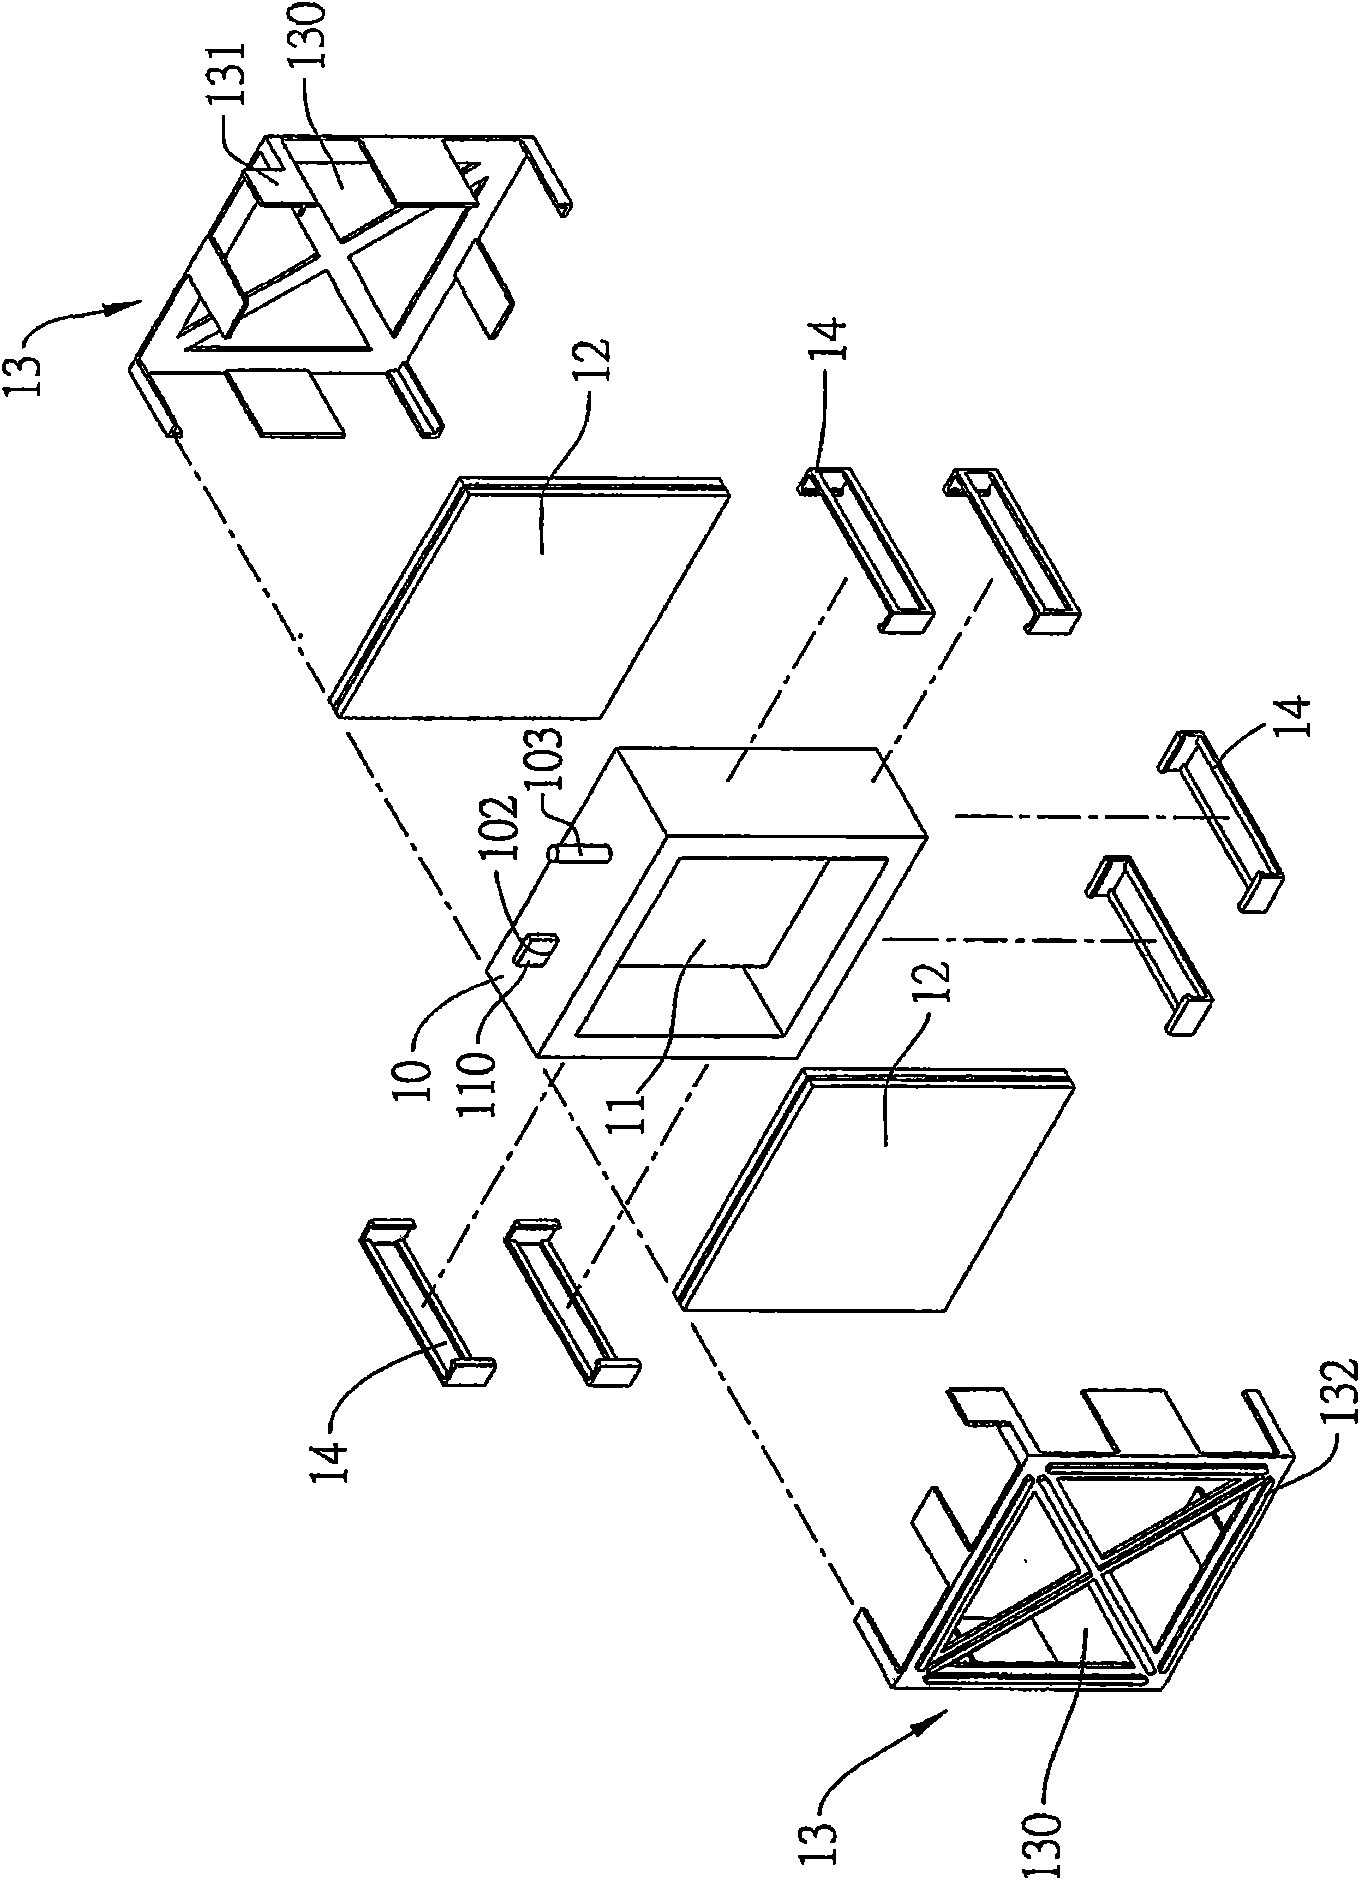 Battery device and packaging, dismounting and recovering method of same